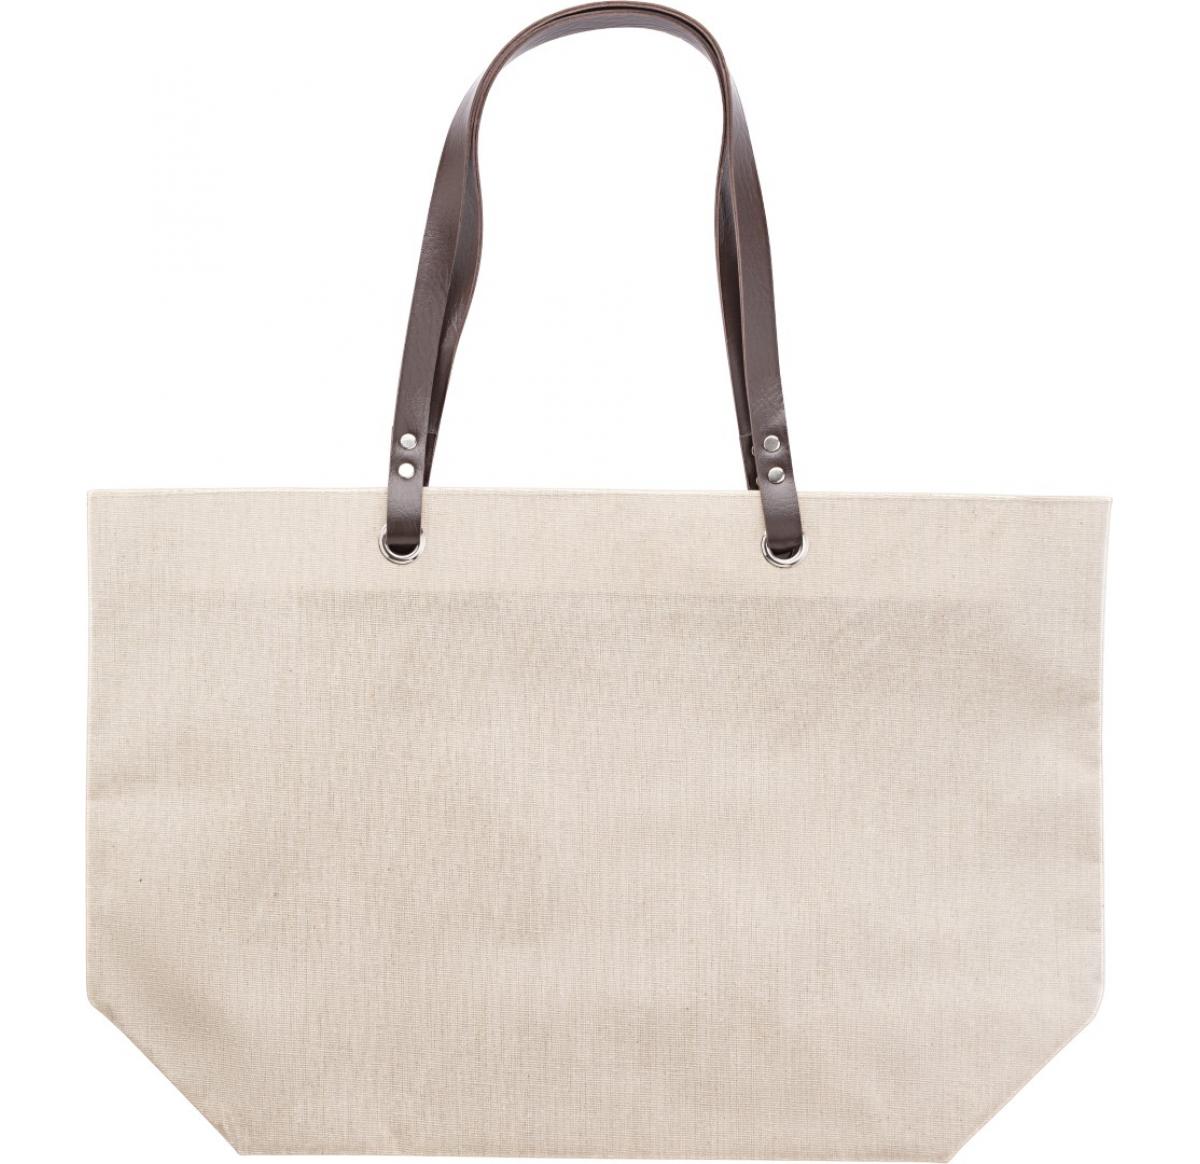 Promotional Printed Linen Beach Bags Totes